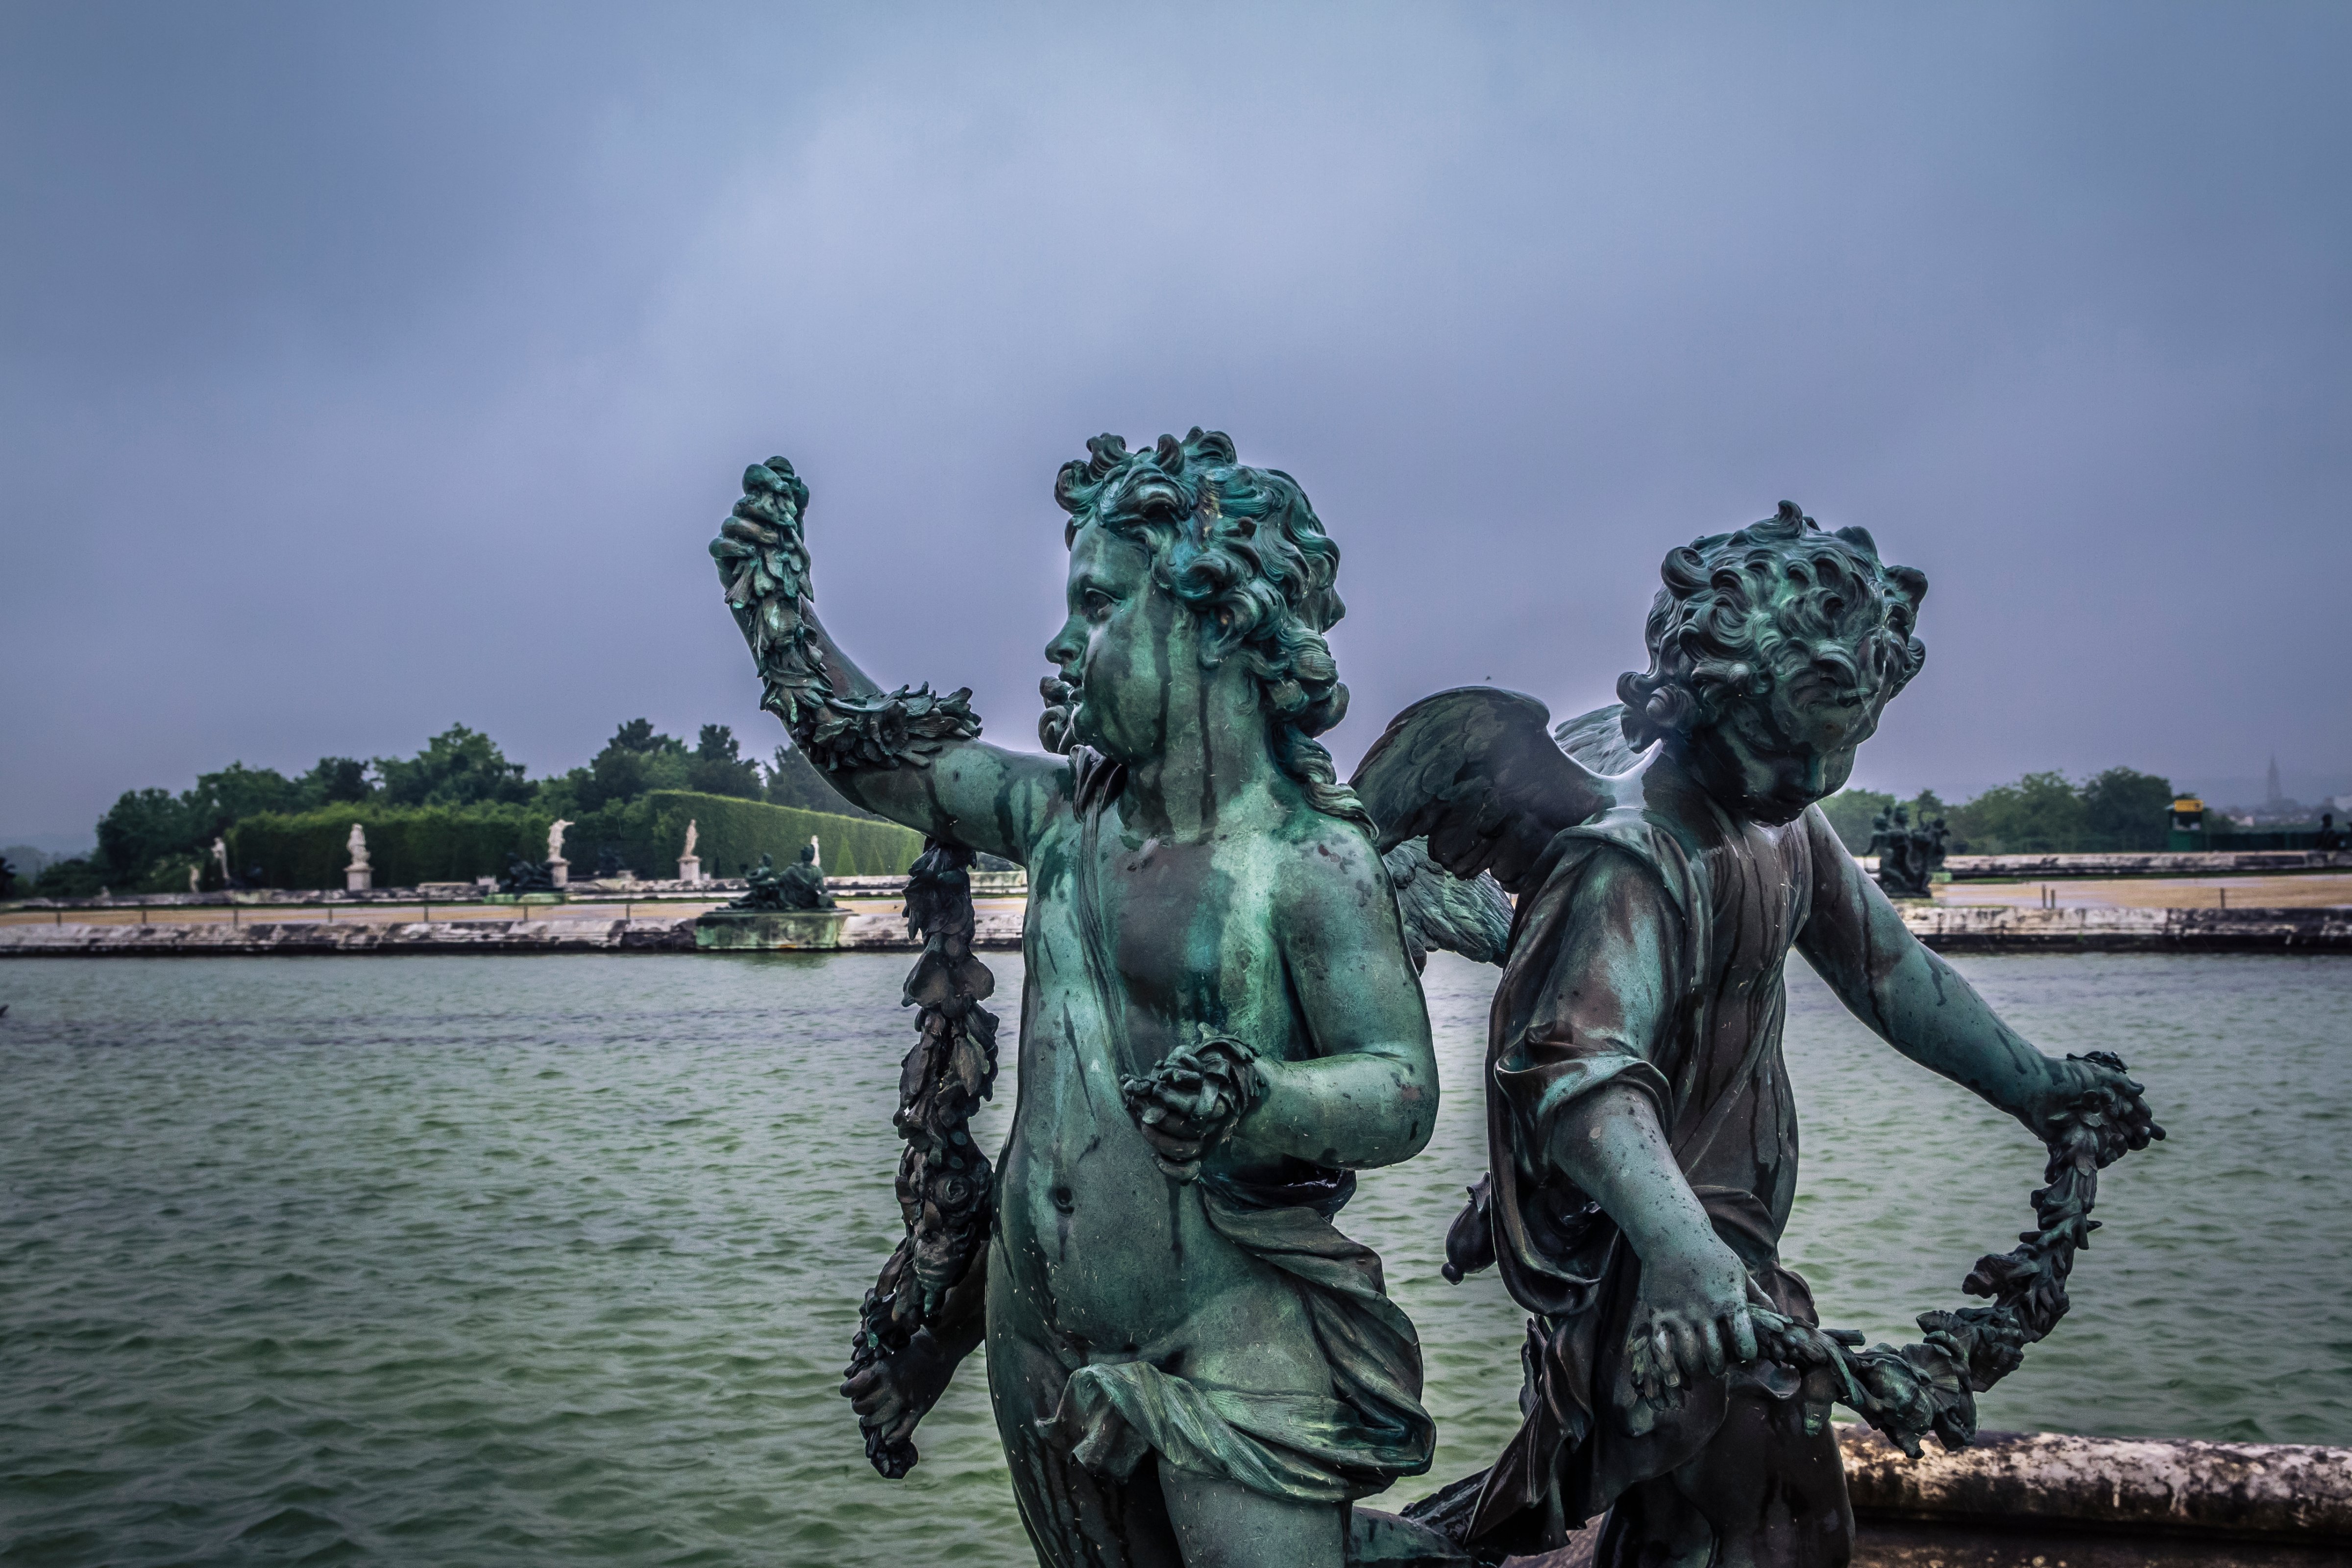 Statues in the Versailles palace gardens (Getty Images)